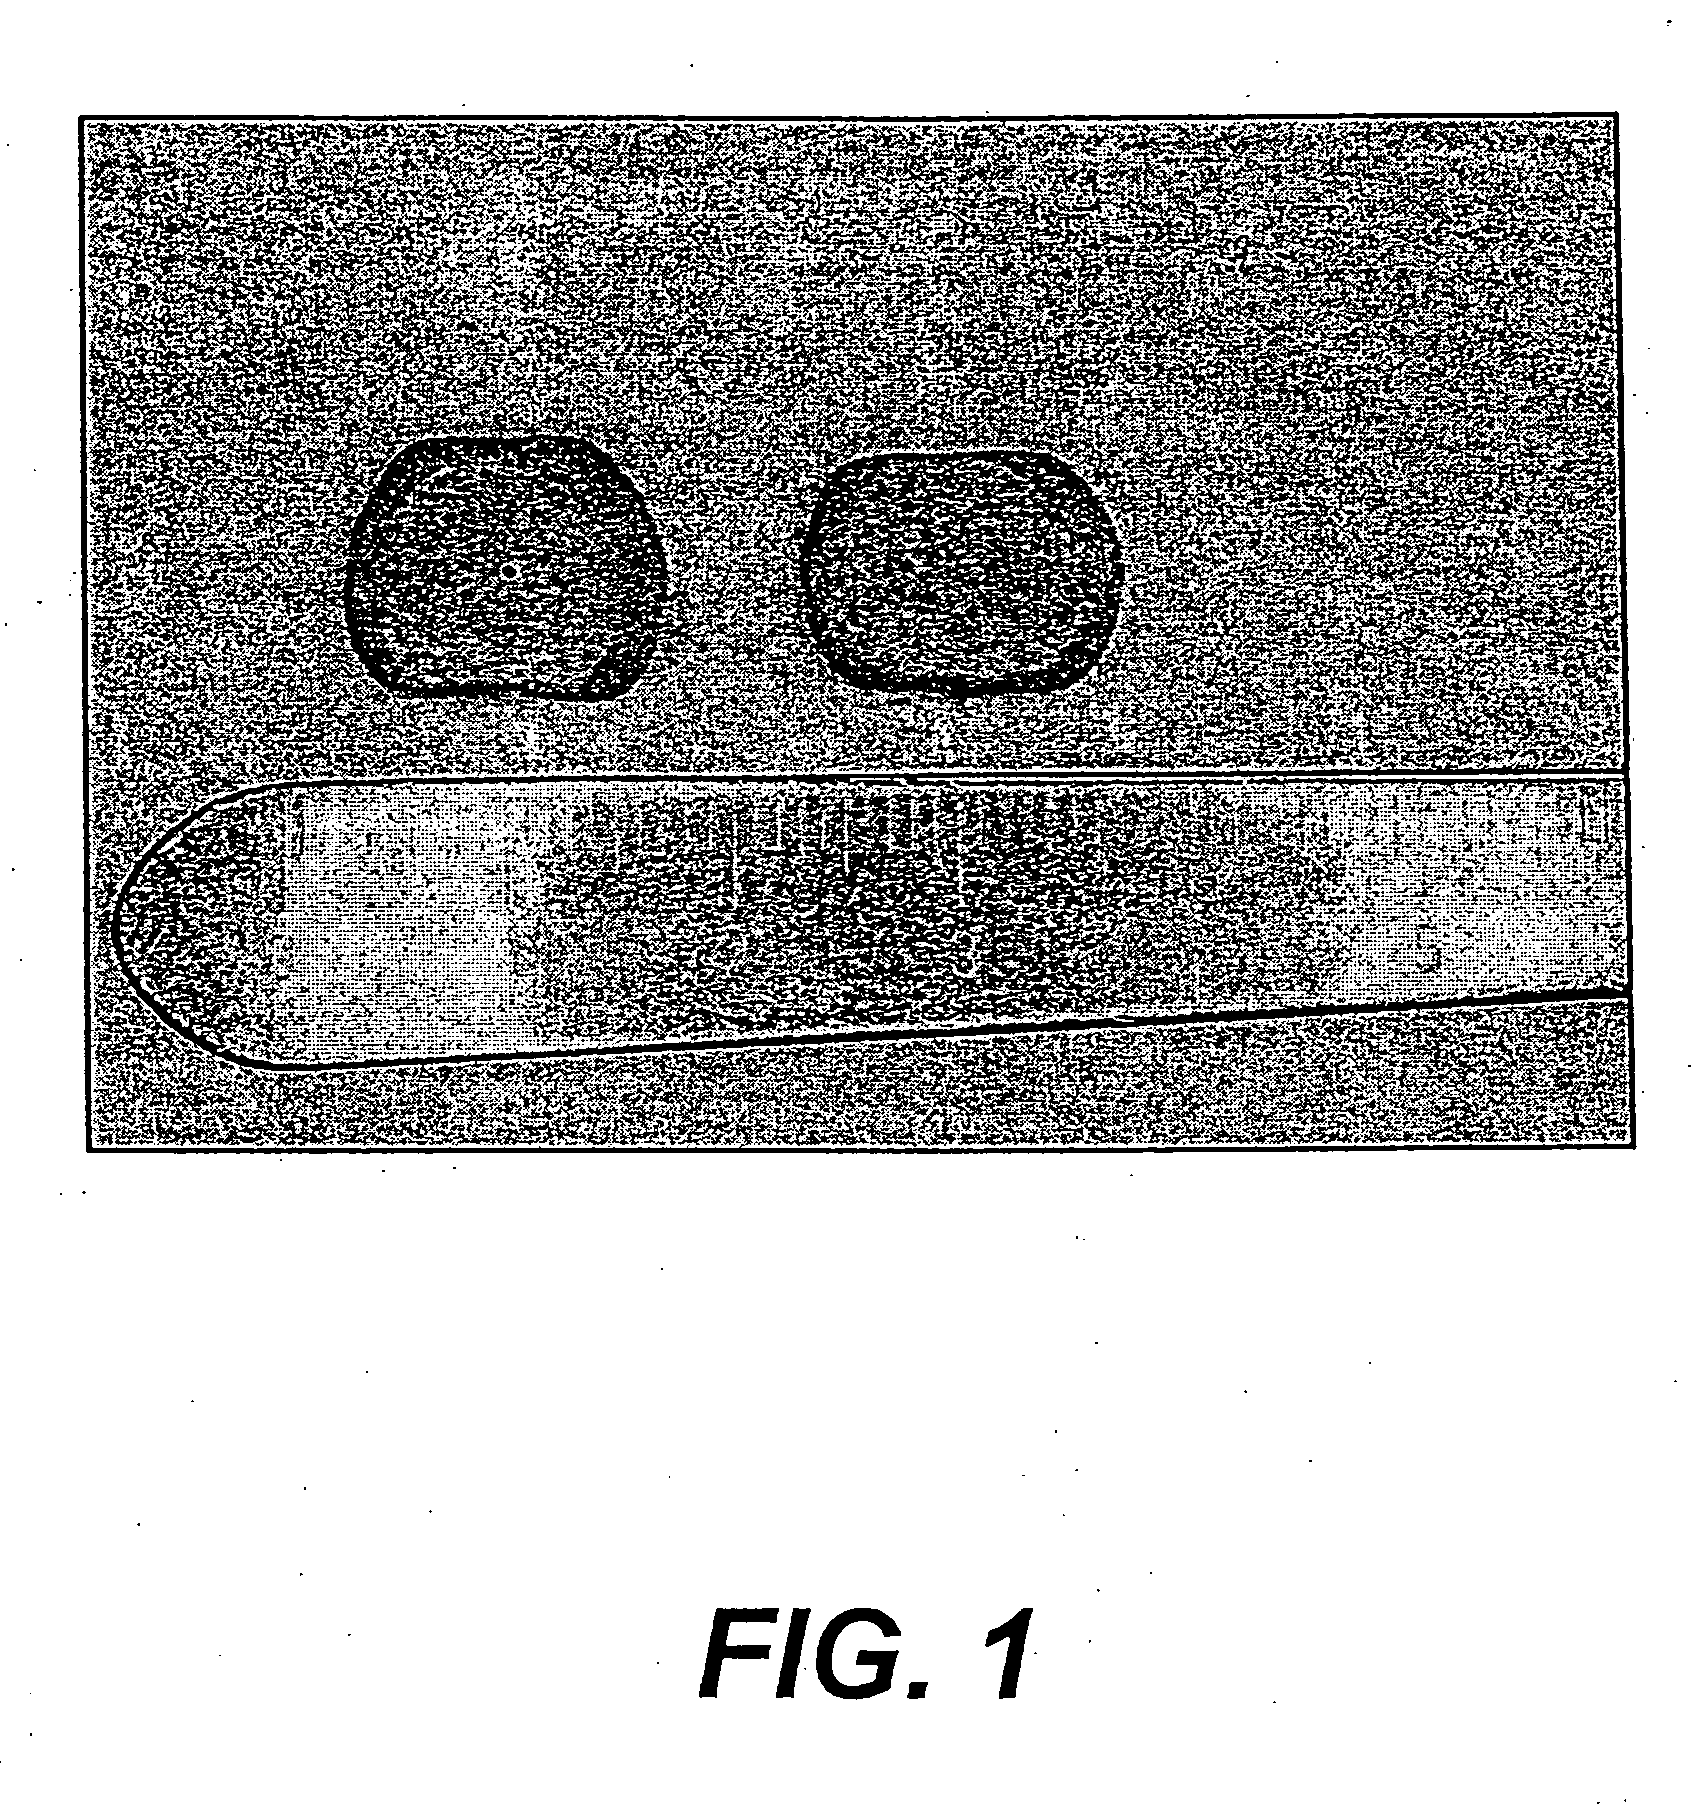 Method for facilitating the production of differentiated cell types and tissues from embryonic and adult pluripotent and multipotent cells